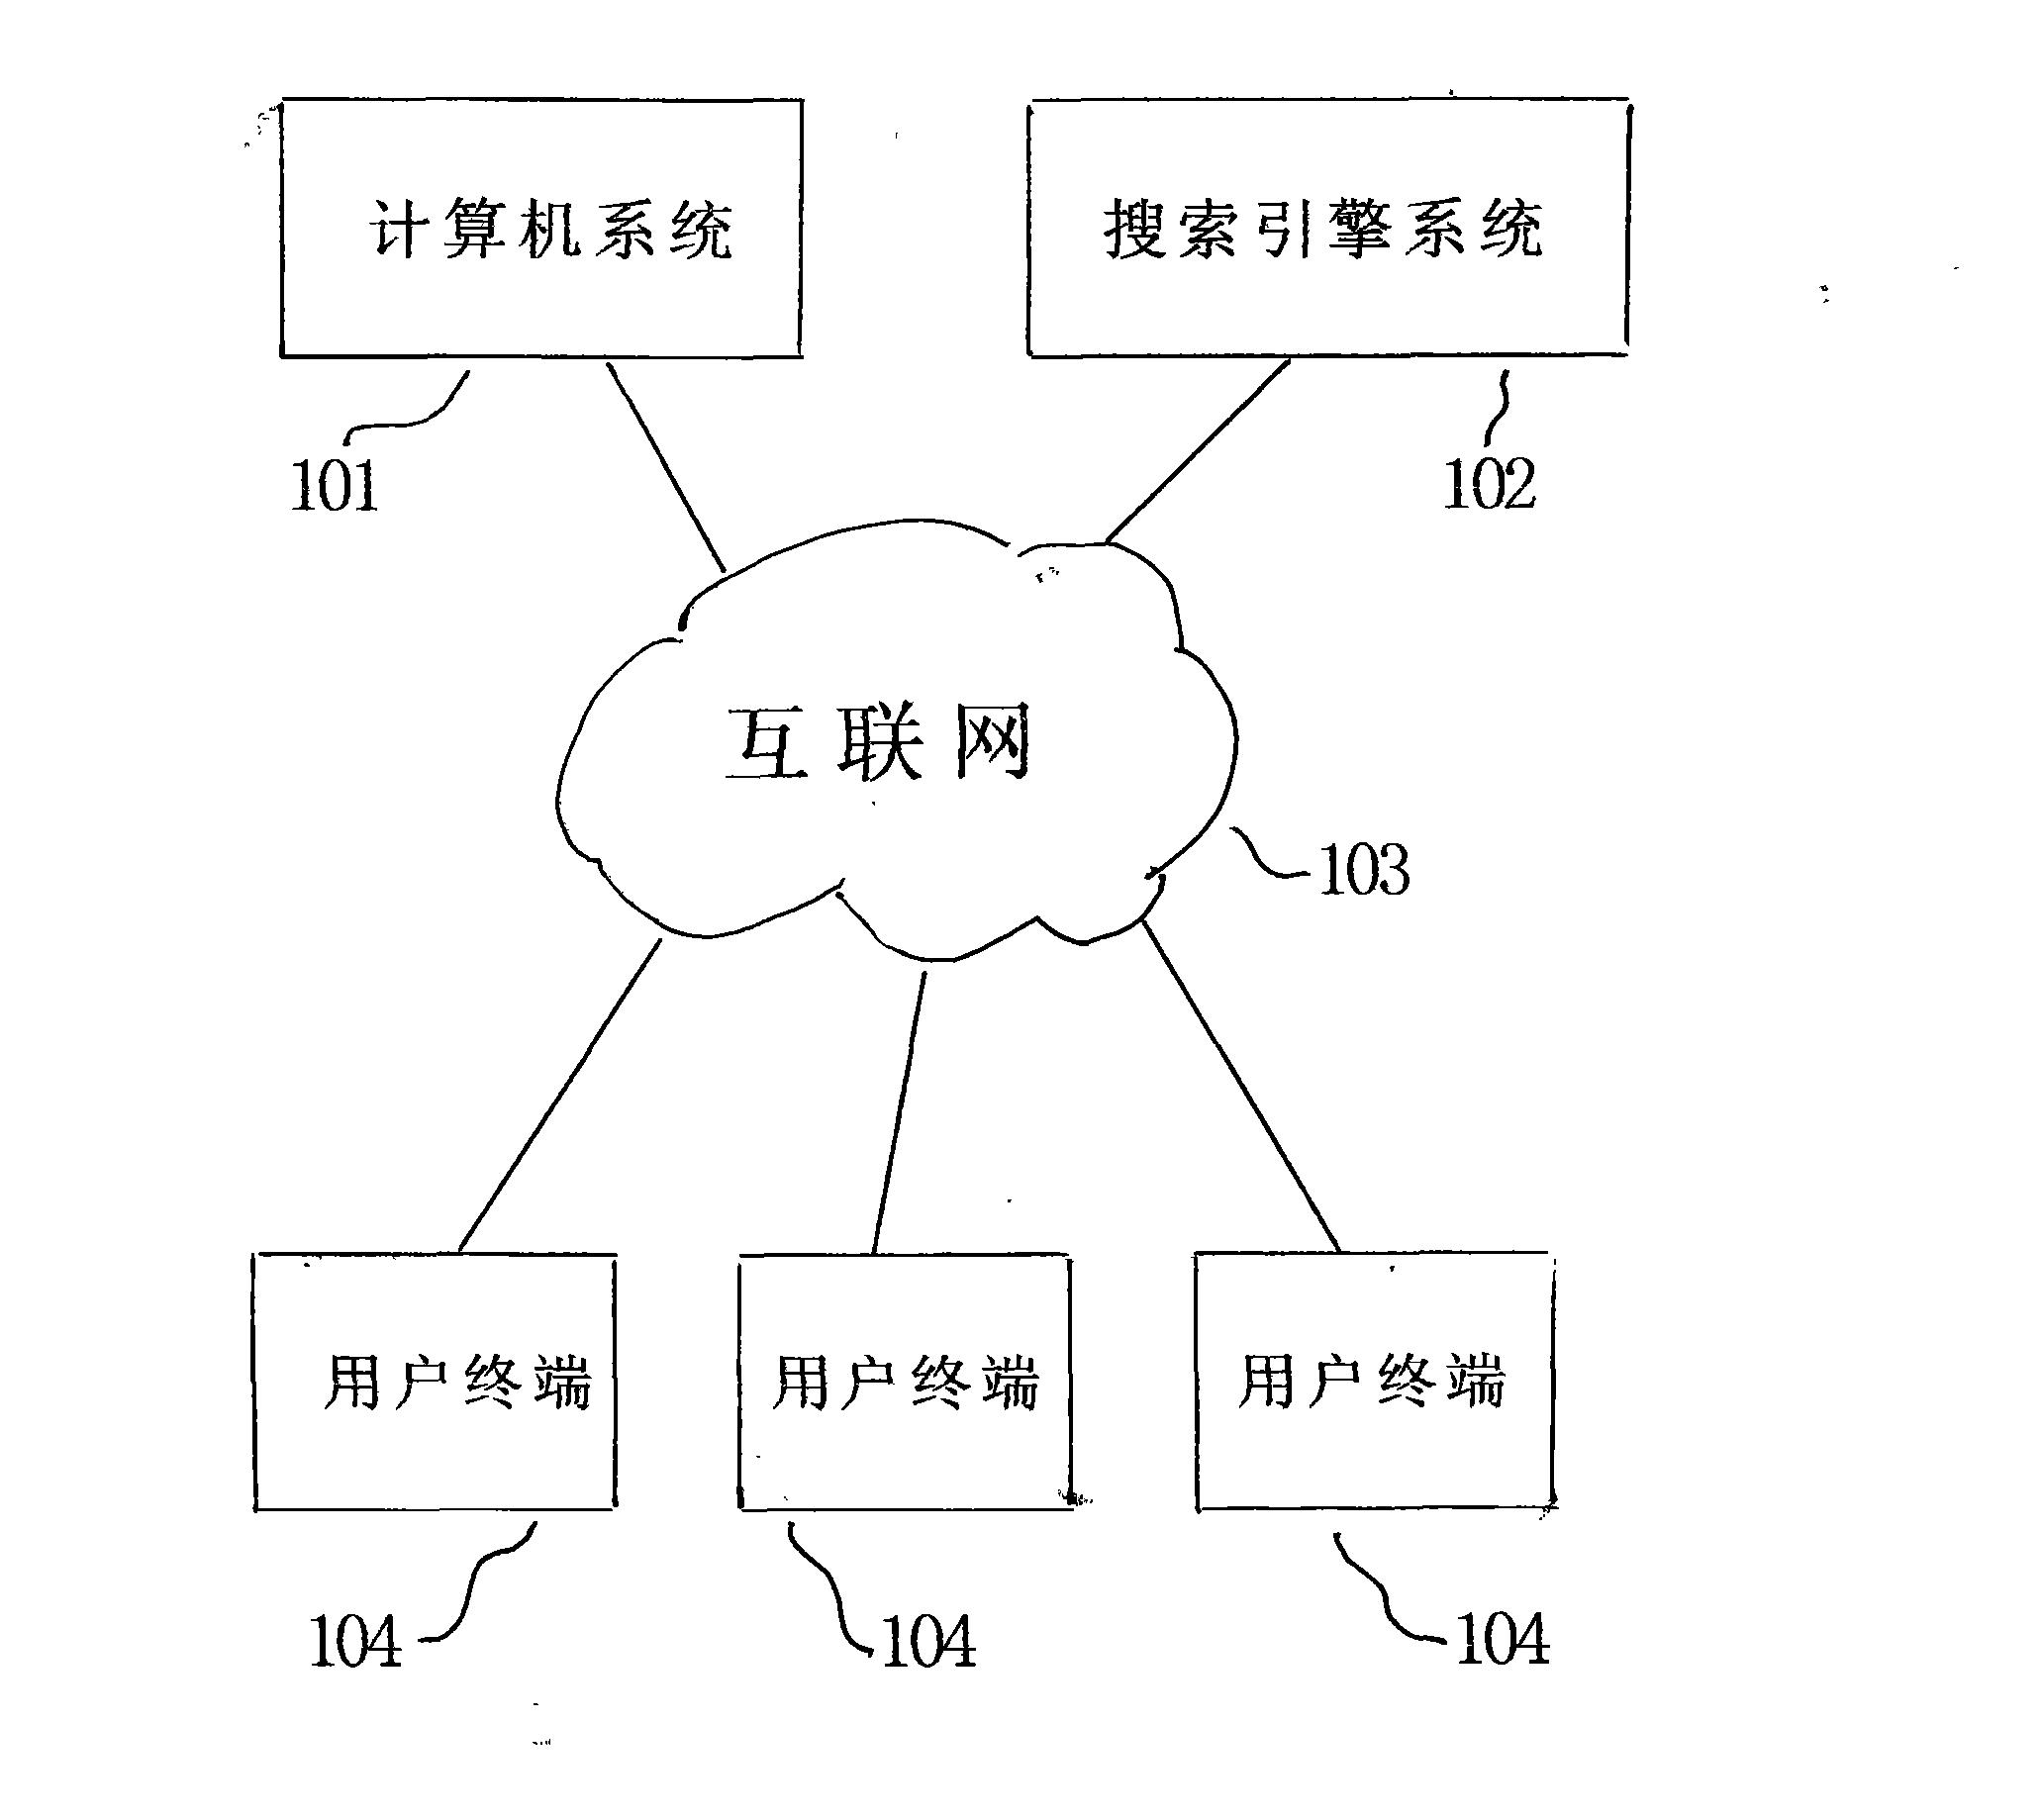 Processing method for inputting additional search requirements into search engines